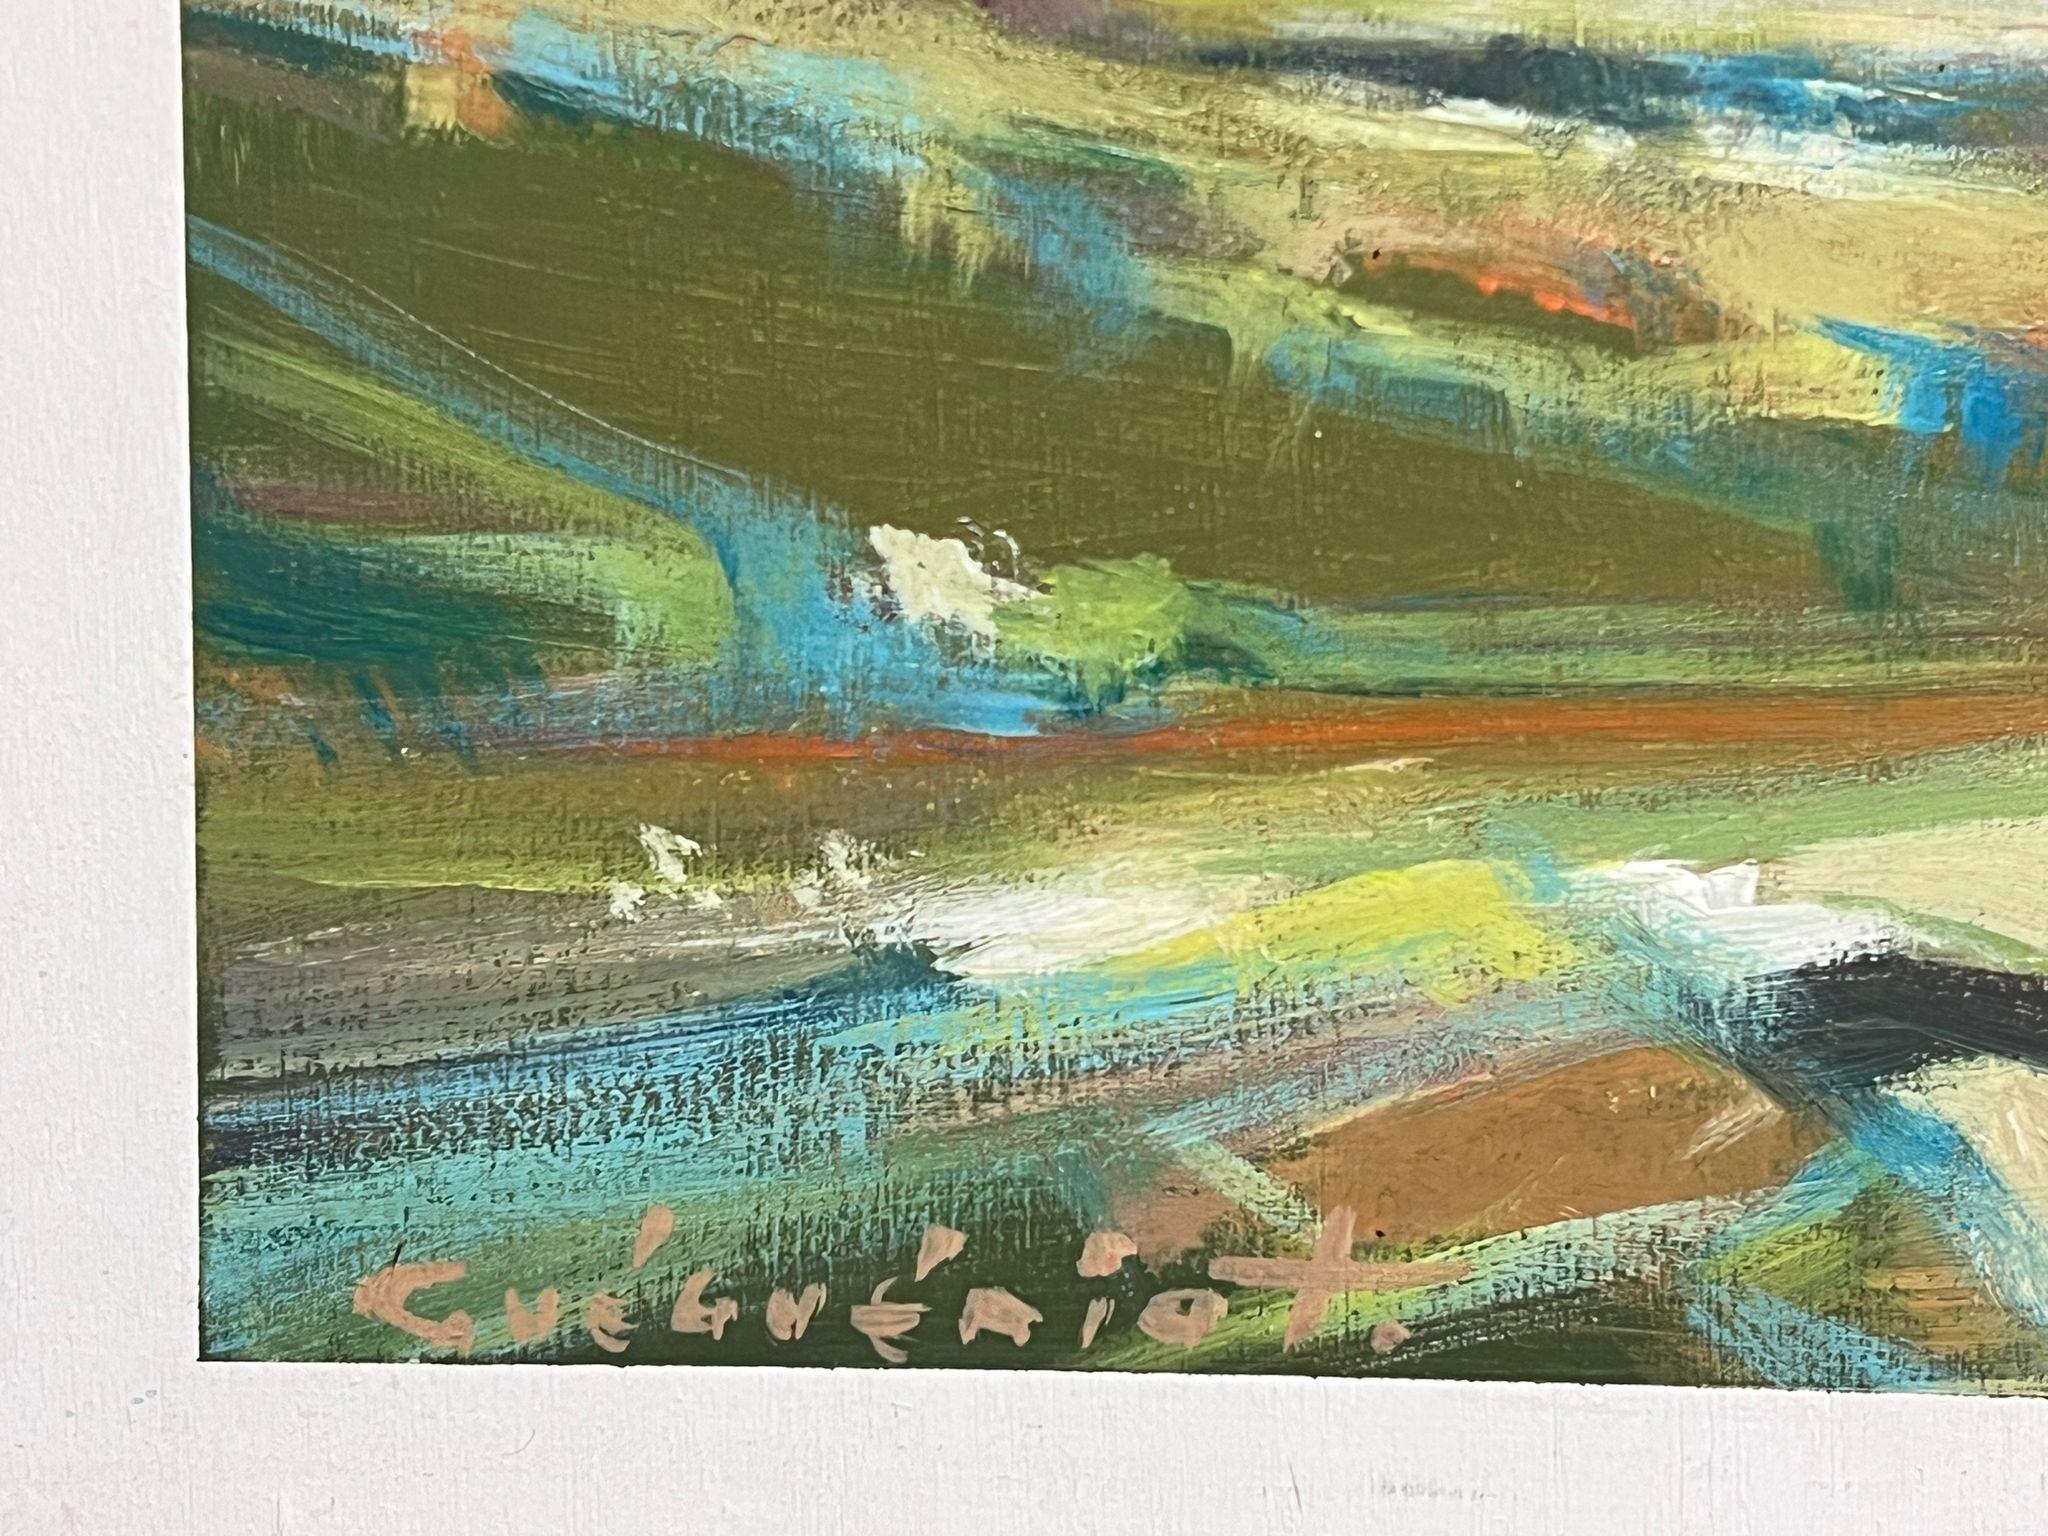 Abstract Expressionist Sky Composition
by Gerard Guegueniat (French 1970's)
signed oil painting on board, 
framed: 16.5 x 32.5 inches
board: 15.5 x 31.5 inches
provenance: private collection, France
condition: very good and sound condition 

Gérard